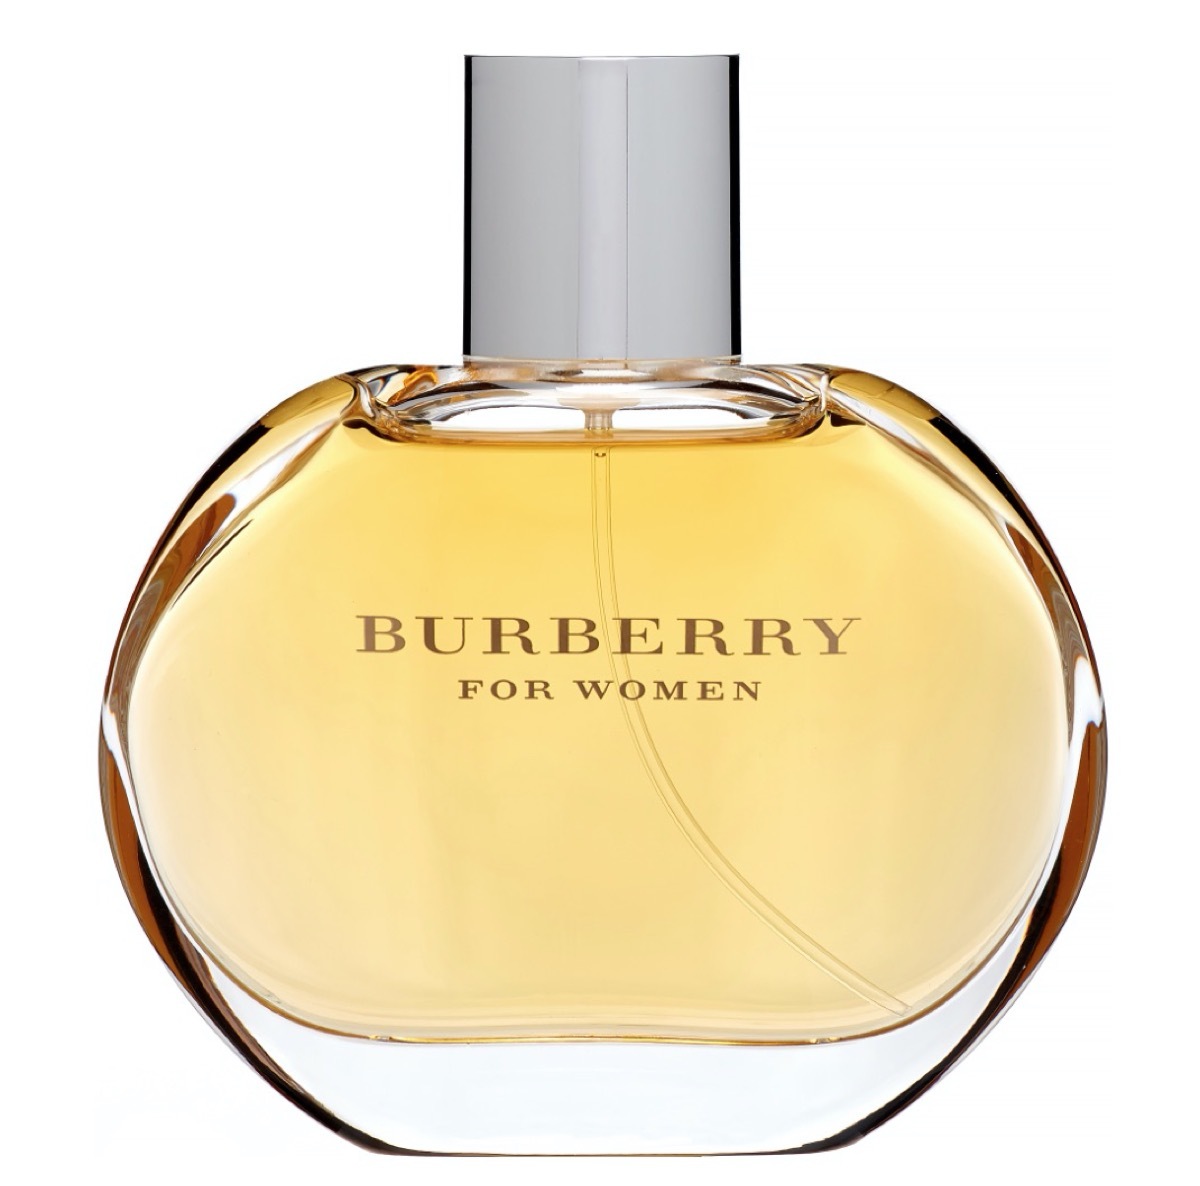 rounded bottle of burberry perfume